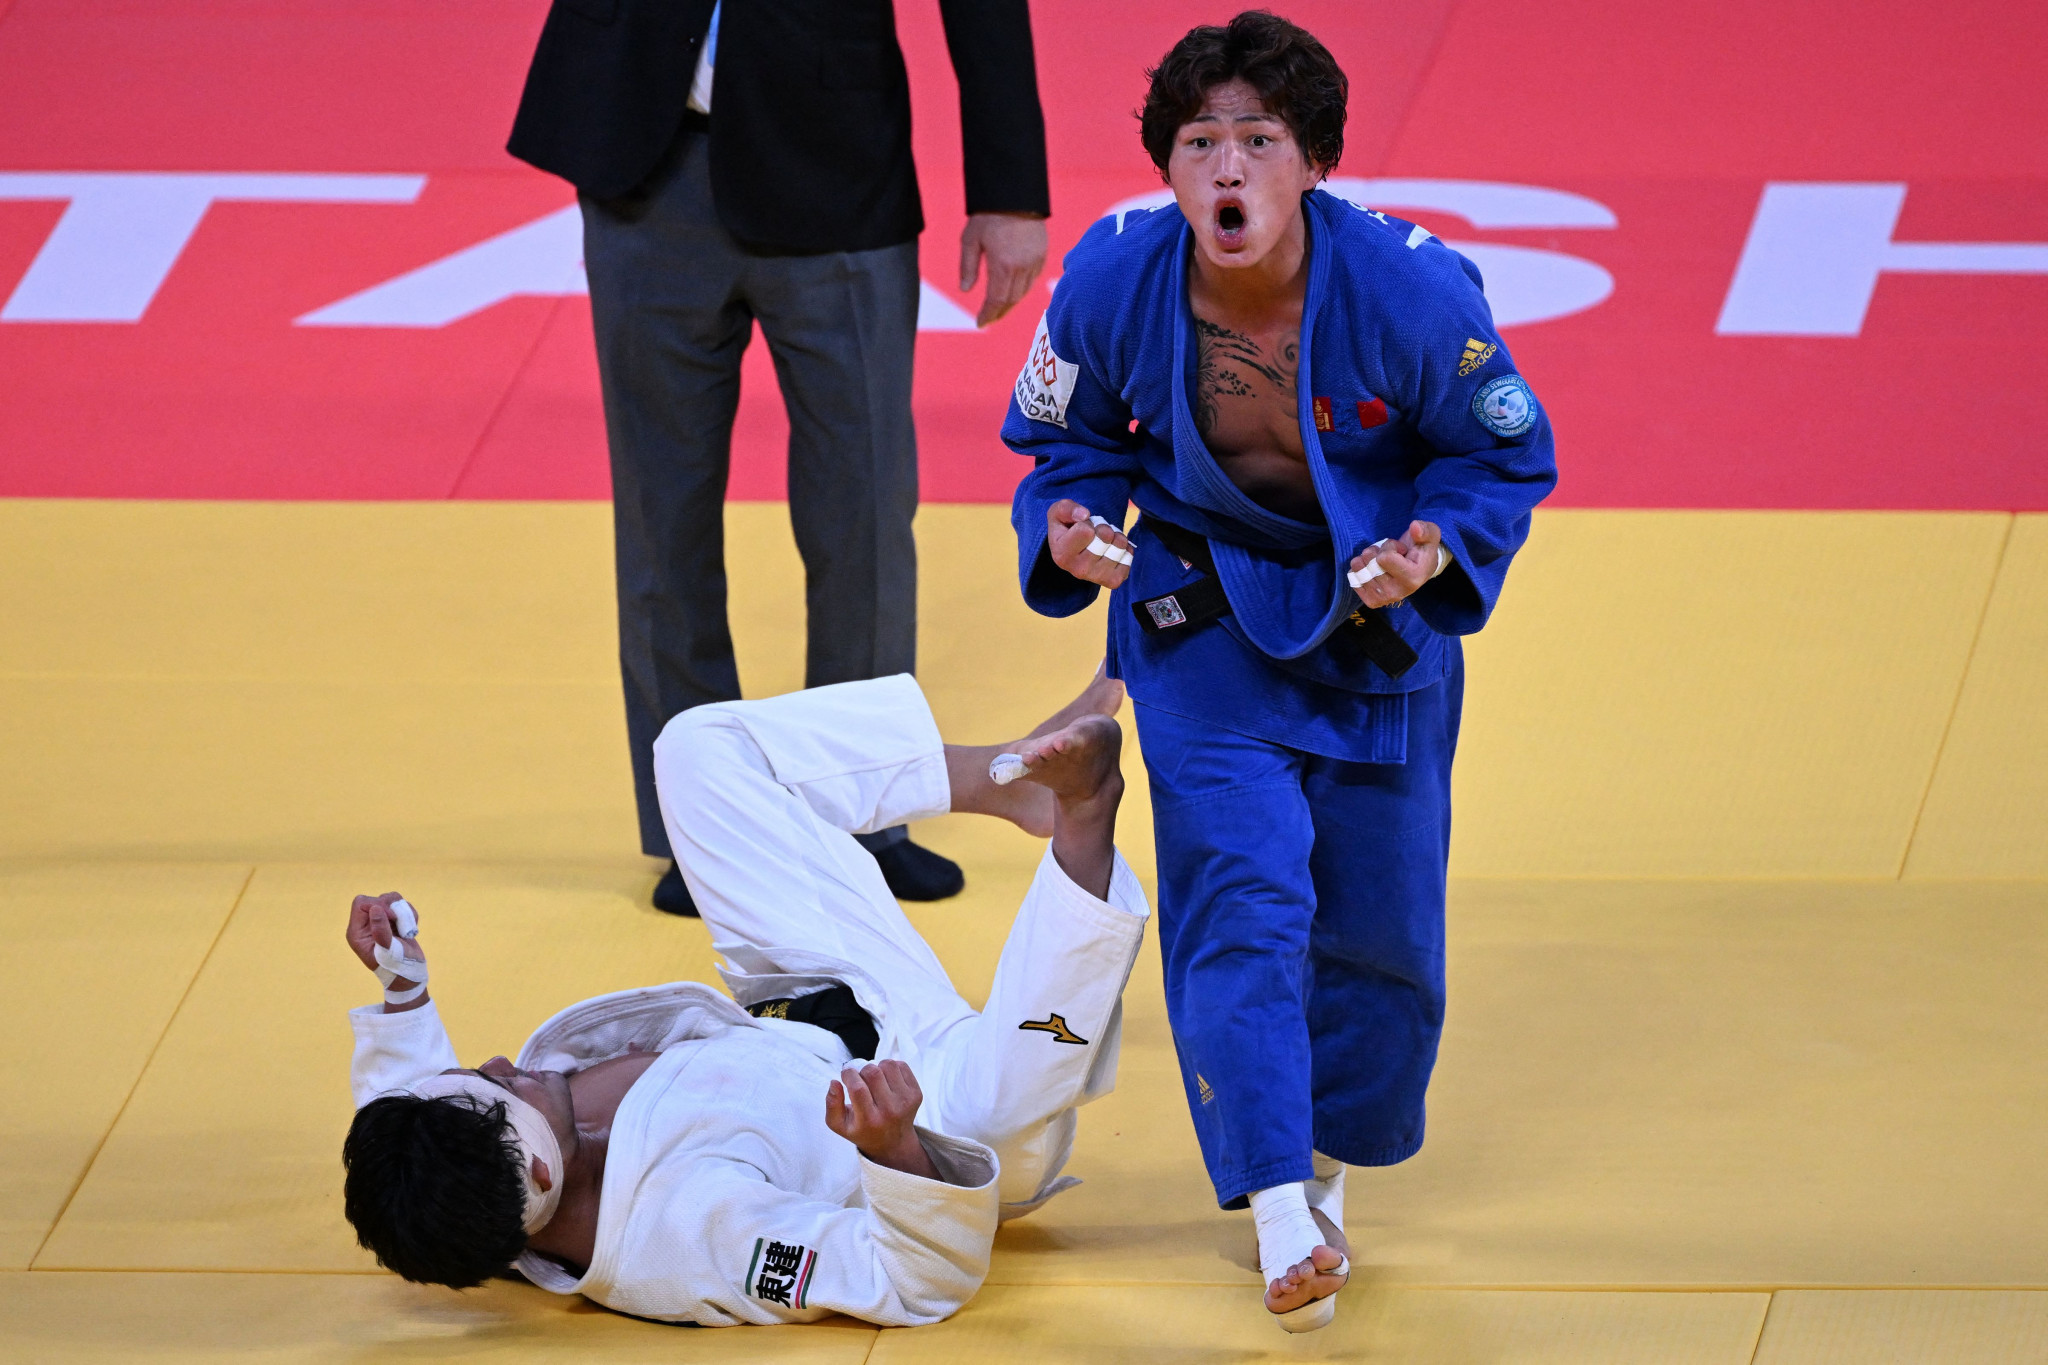 Tsogtbaatar Tsend-Ochir of Mongolia, right, also beat a Japanese judoka in the men's under-73kg decider as he got the better of Soichi Hashimoto in the final bout of the day ©Getty Images